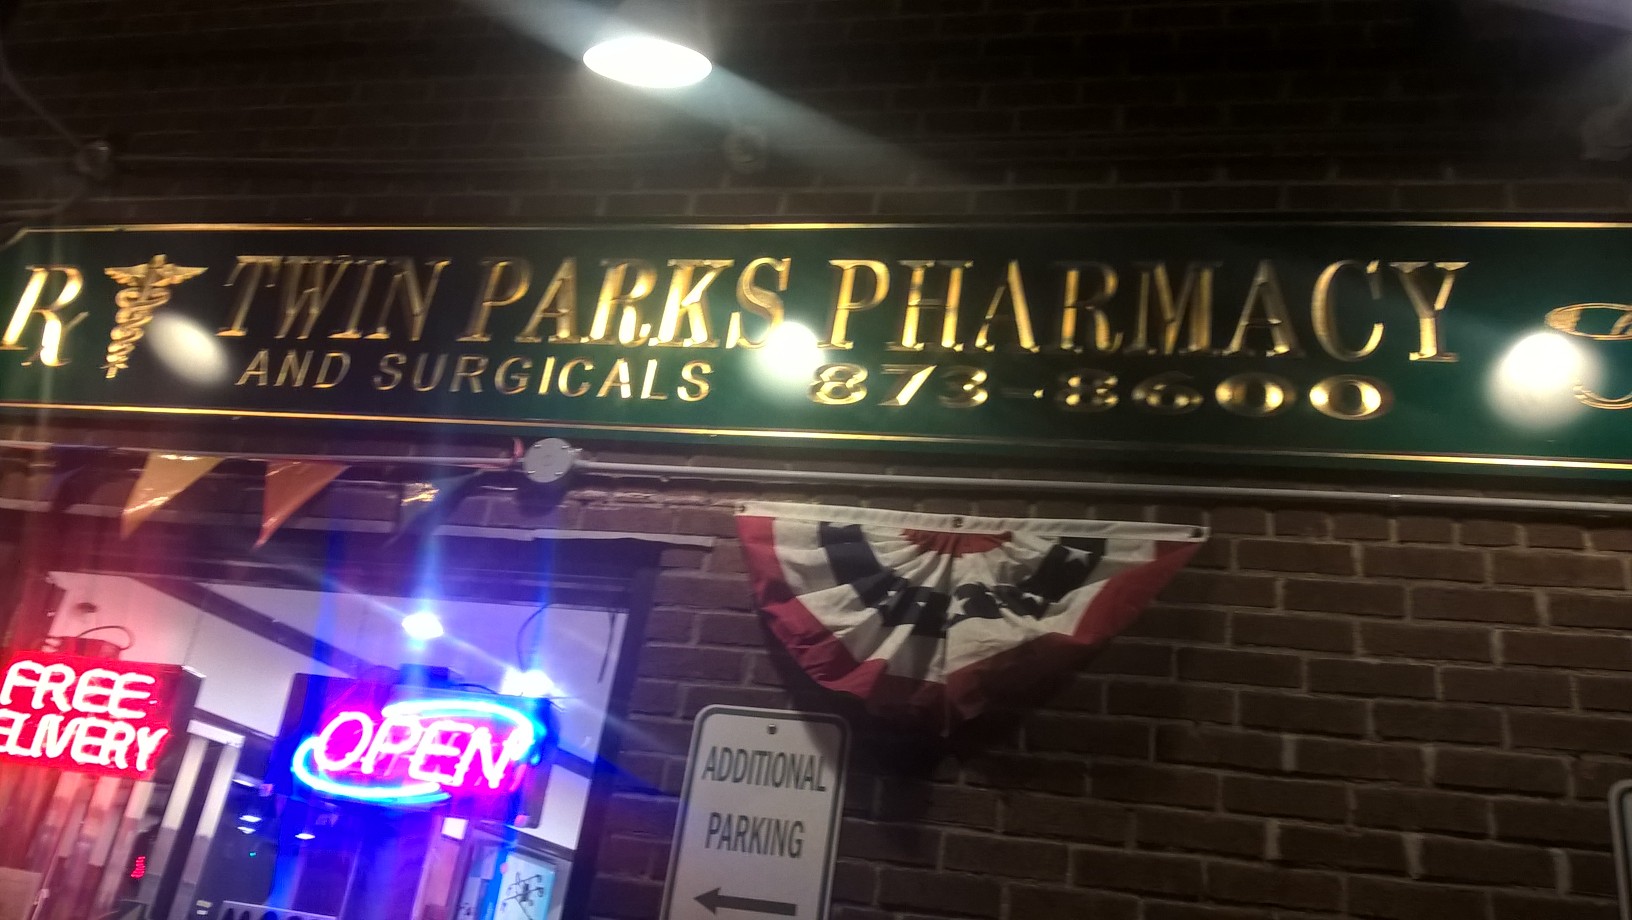 TWIN PARKS PHARMACY AND SURGICALS